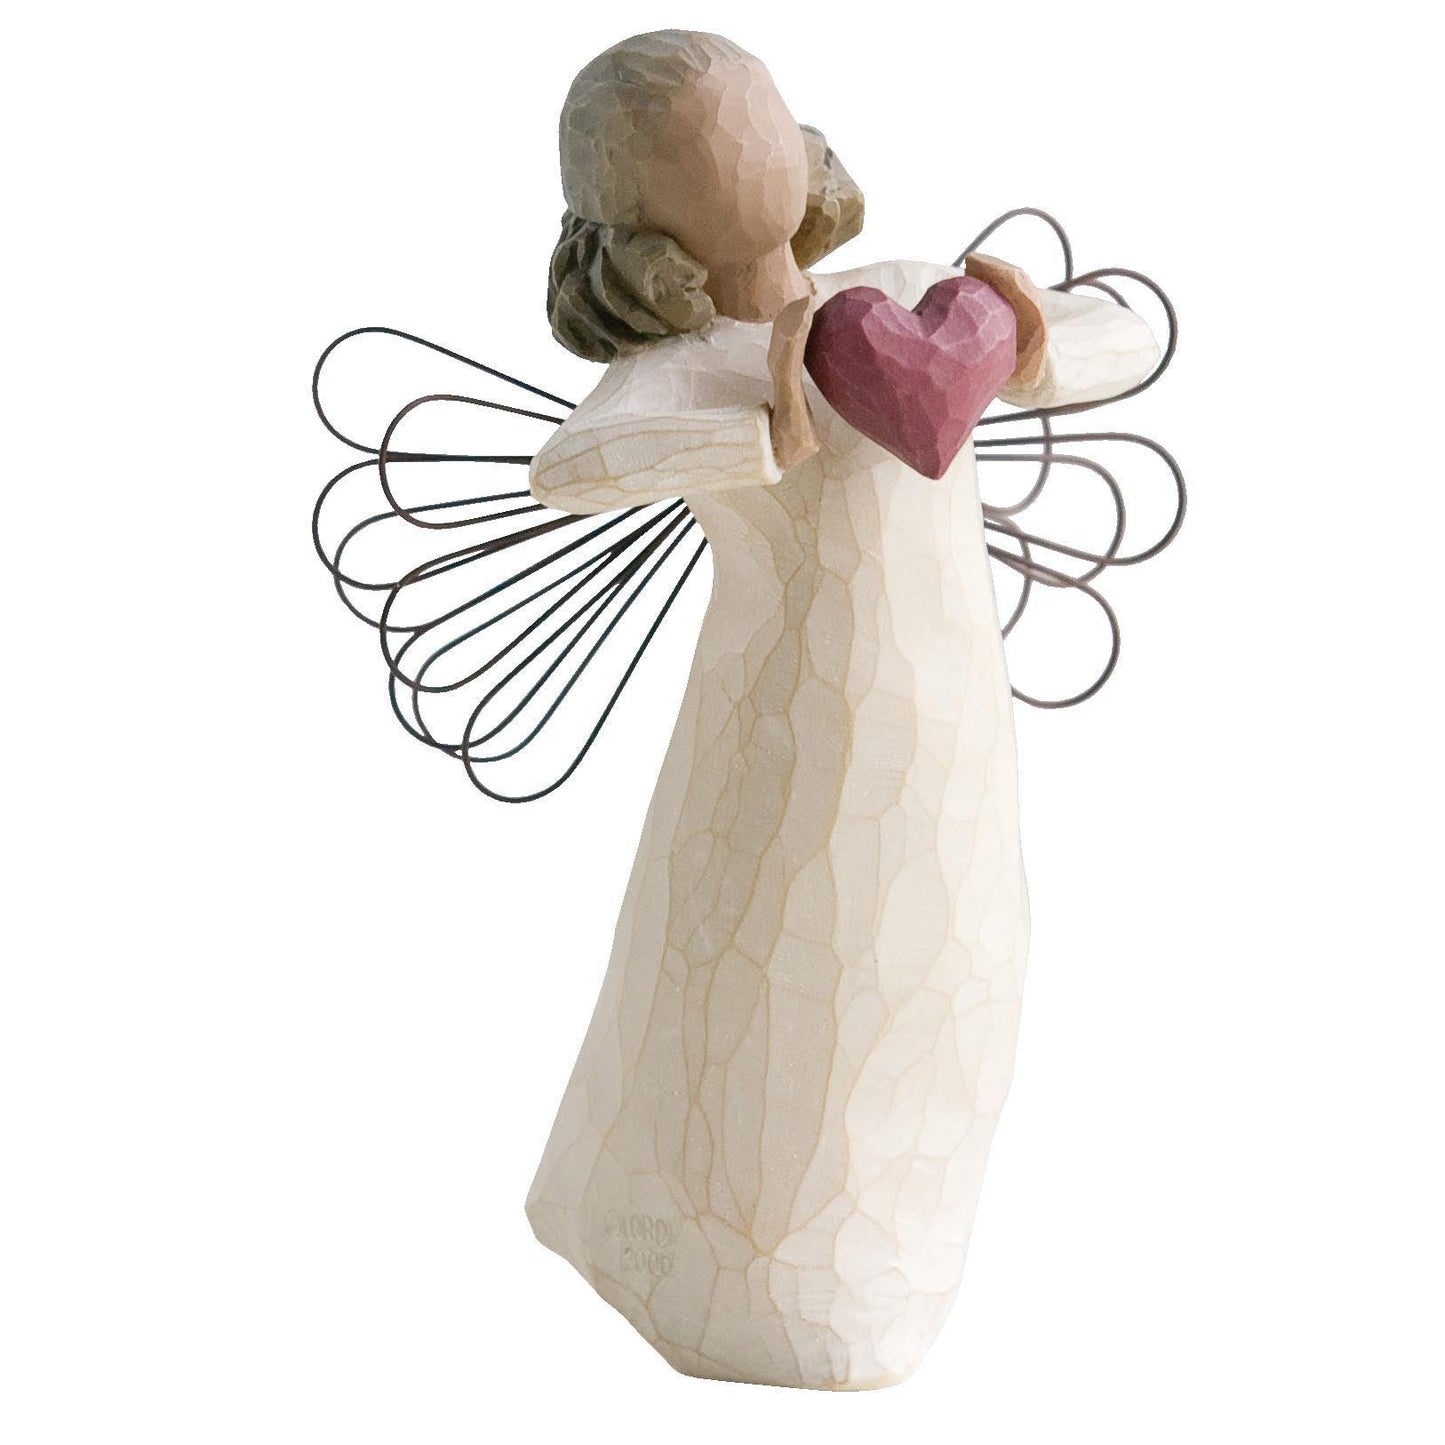 Willow Tree - With Love (Willow Tree) - Gallery Gifts Online 